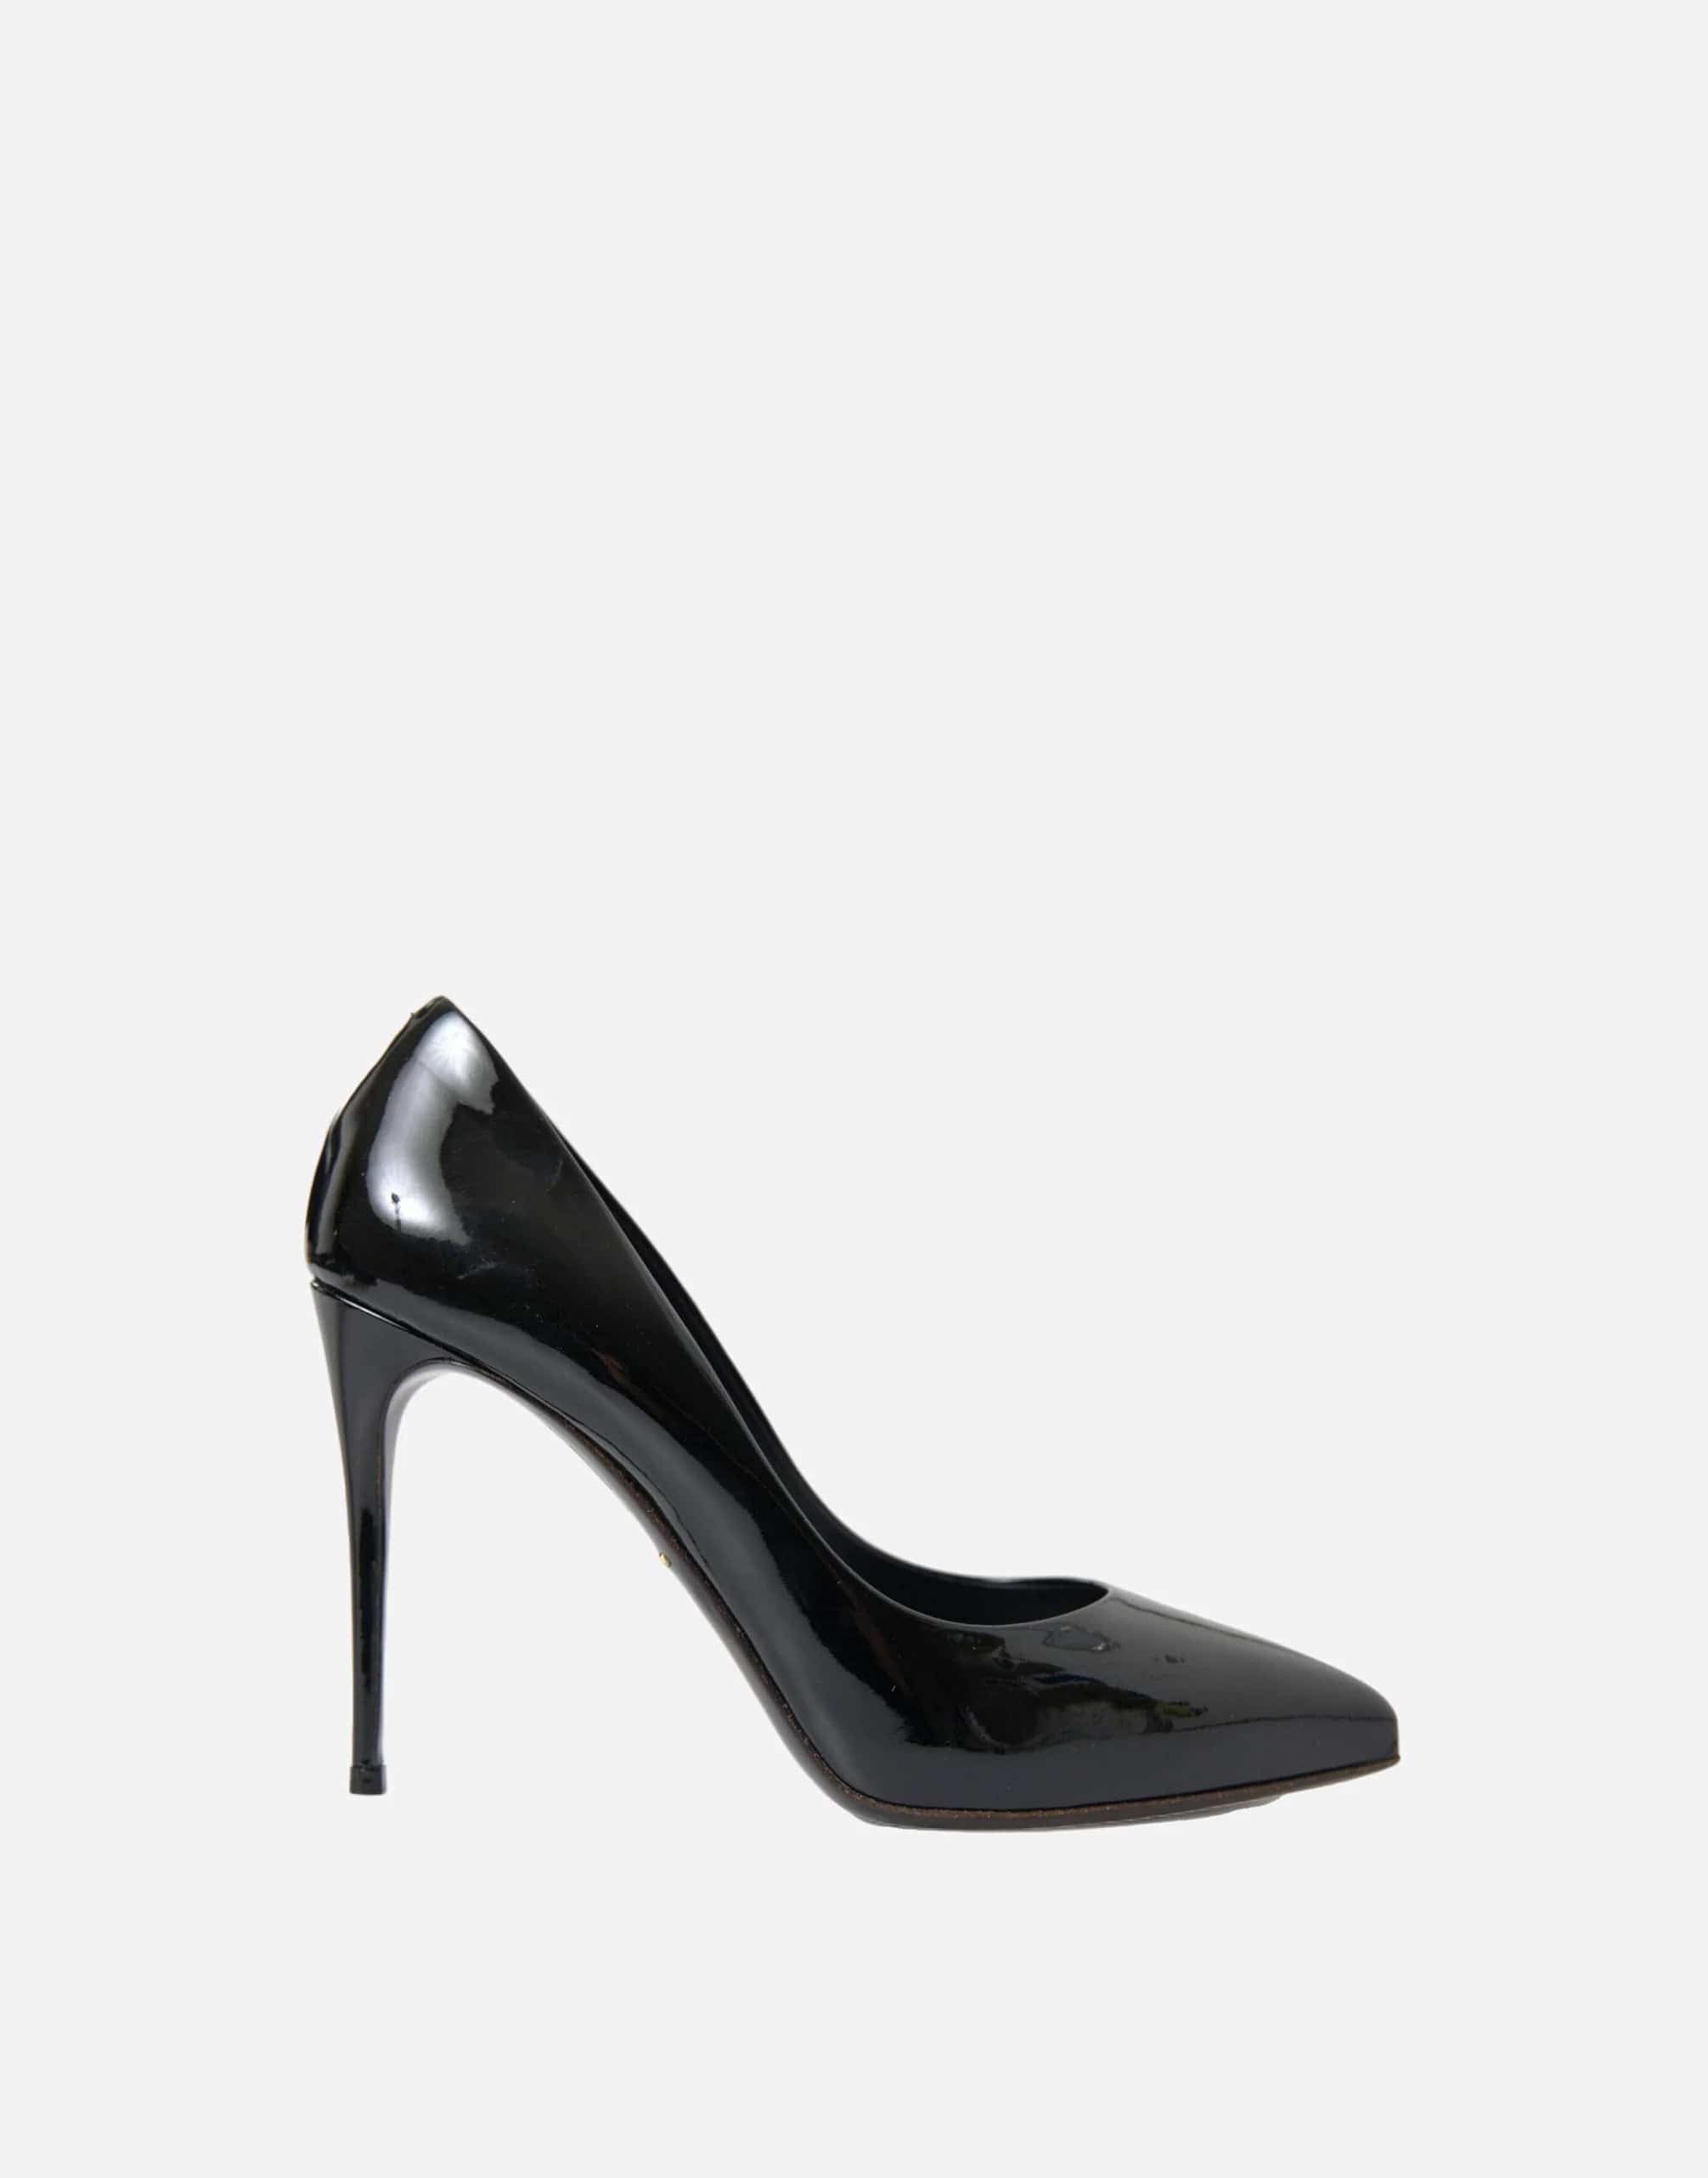 Dolce & Gabbana Pumps With Patent Leather